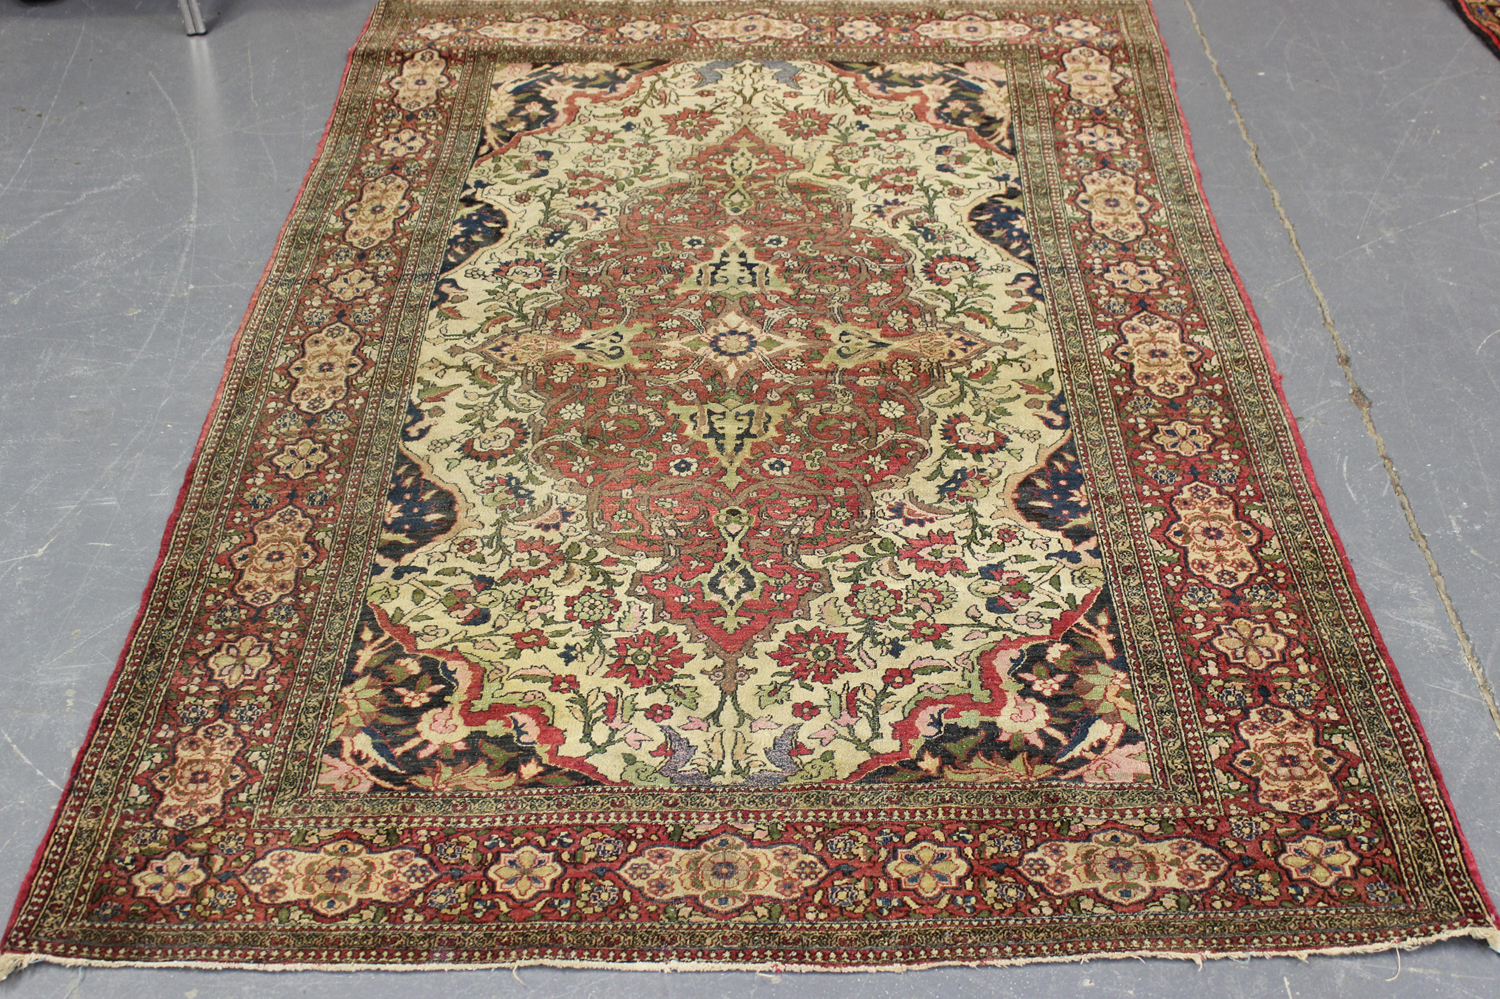 An Esfahan rug, Central Persia, early 20th century, the ivory field with a shaped foliate